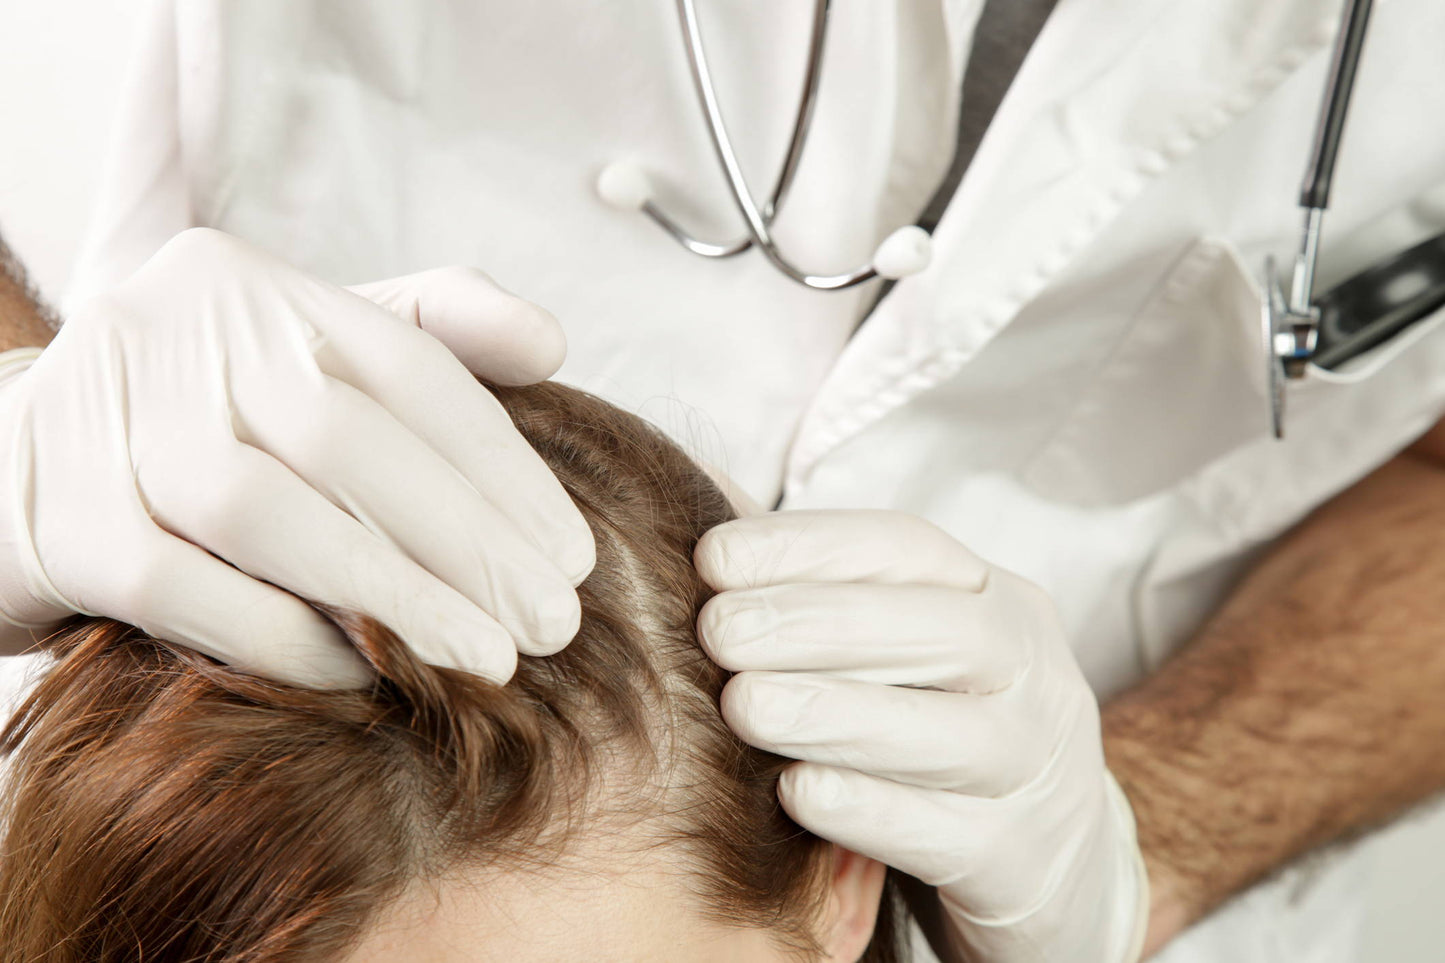 Can Topical Antifungals Cause Hair Loss?